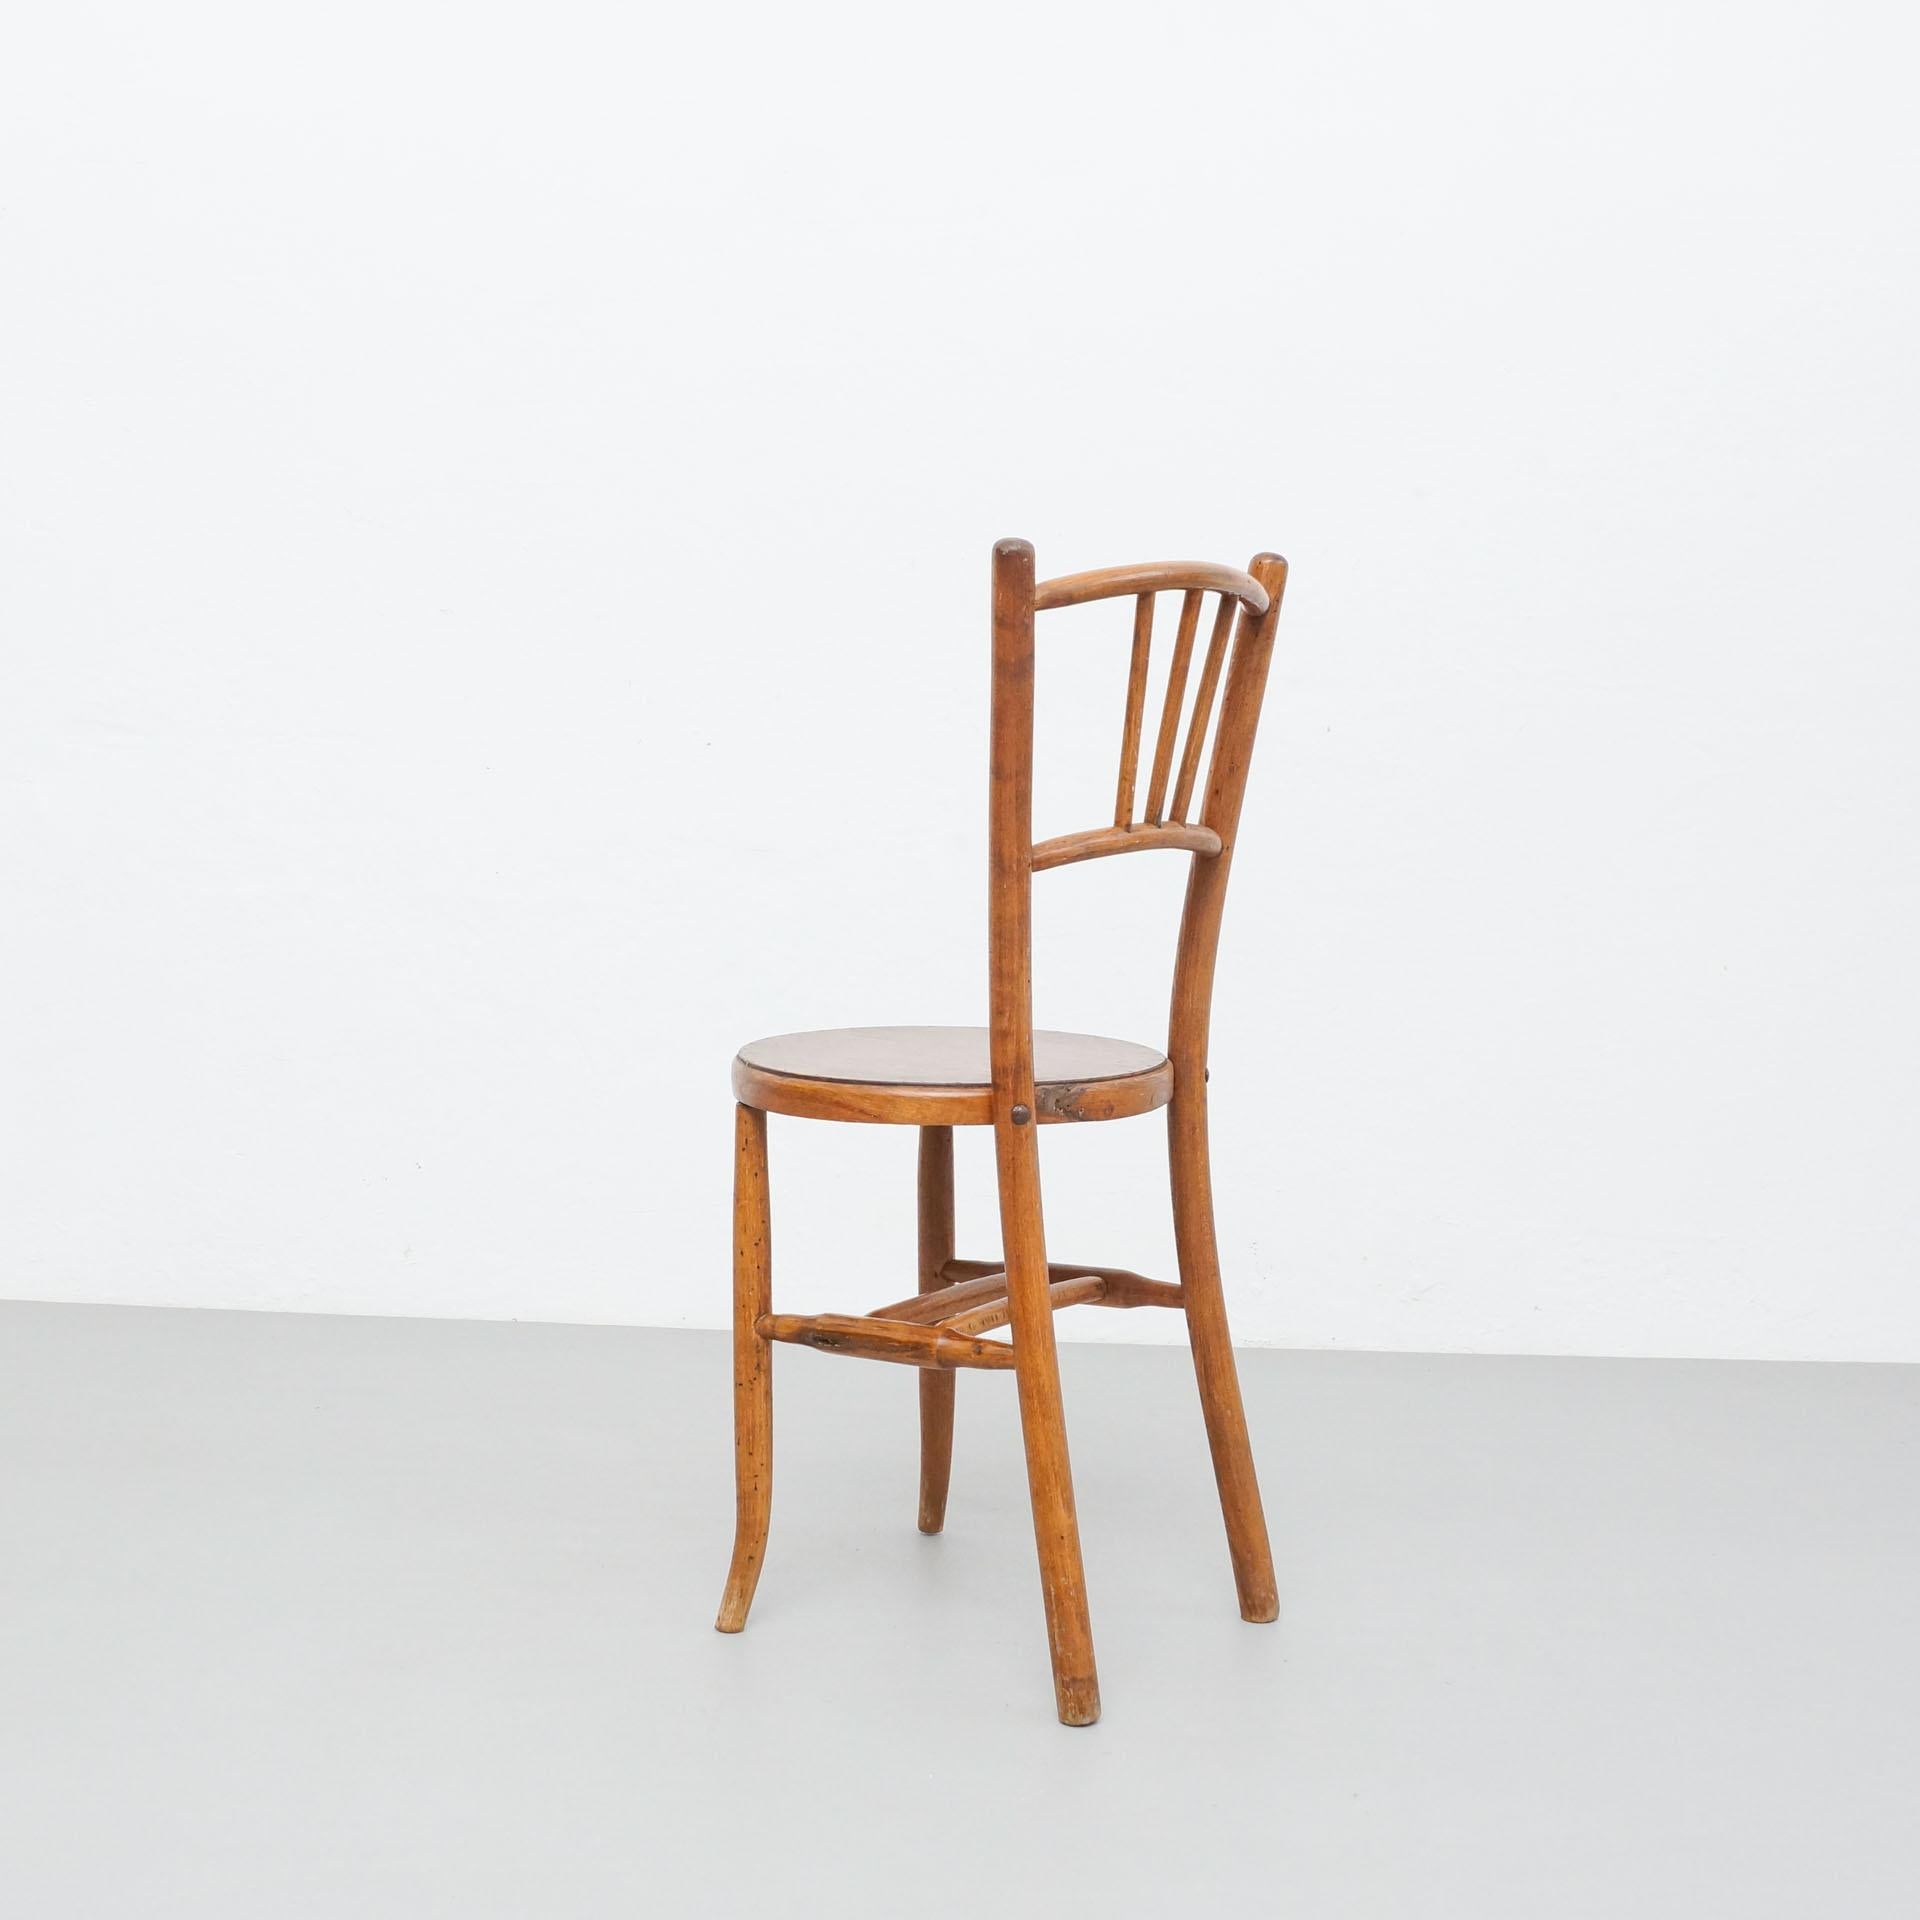 Mid-20th Century Rustic French Bentwood Chair in the Style of Thonet, circa 1940